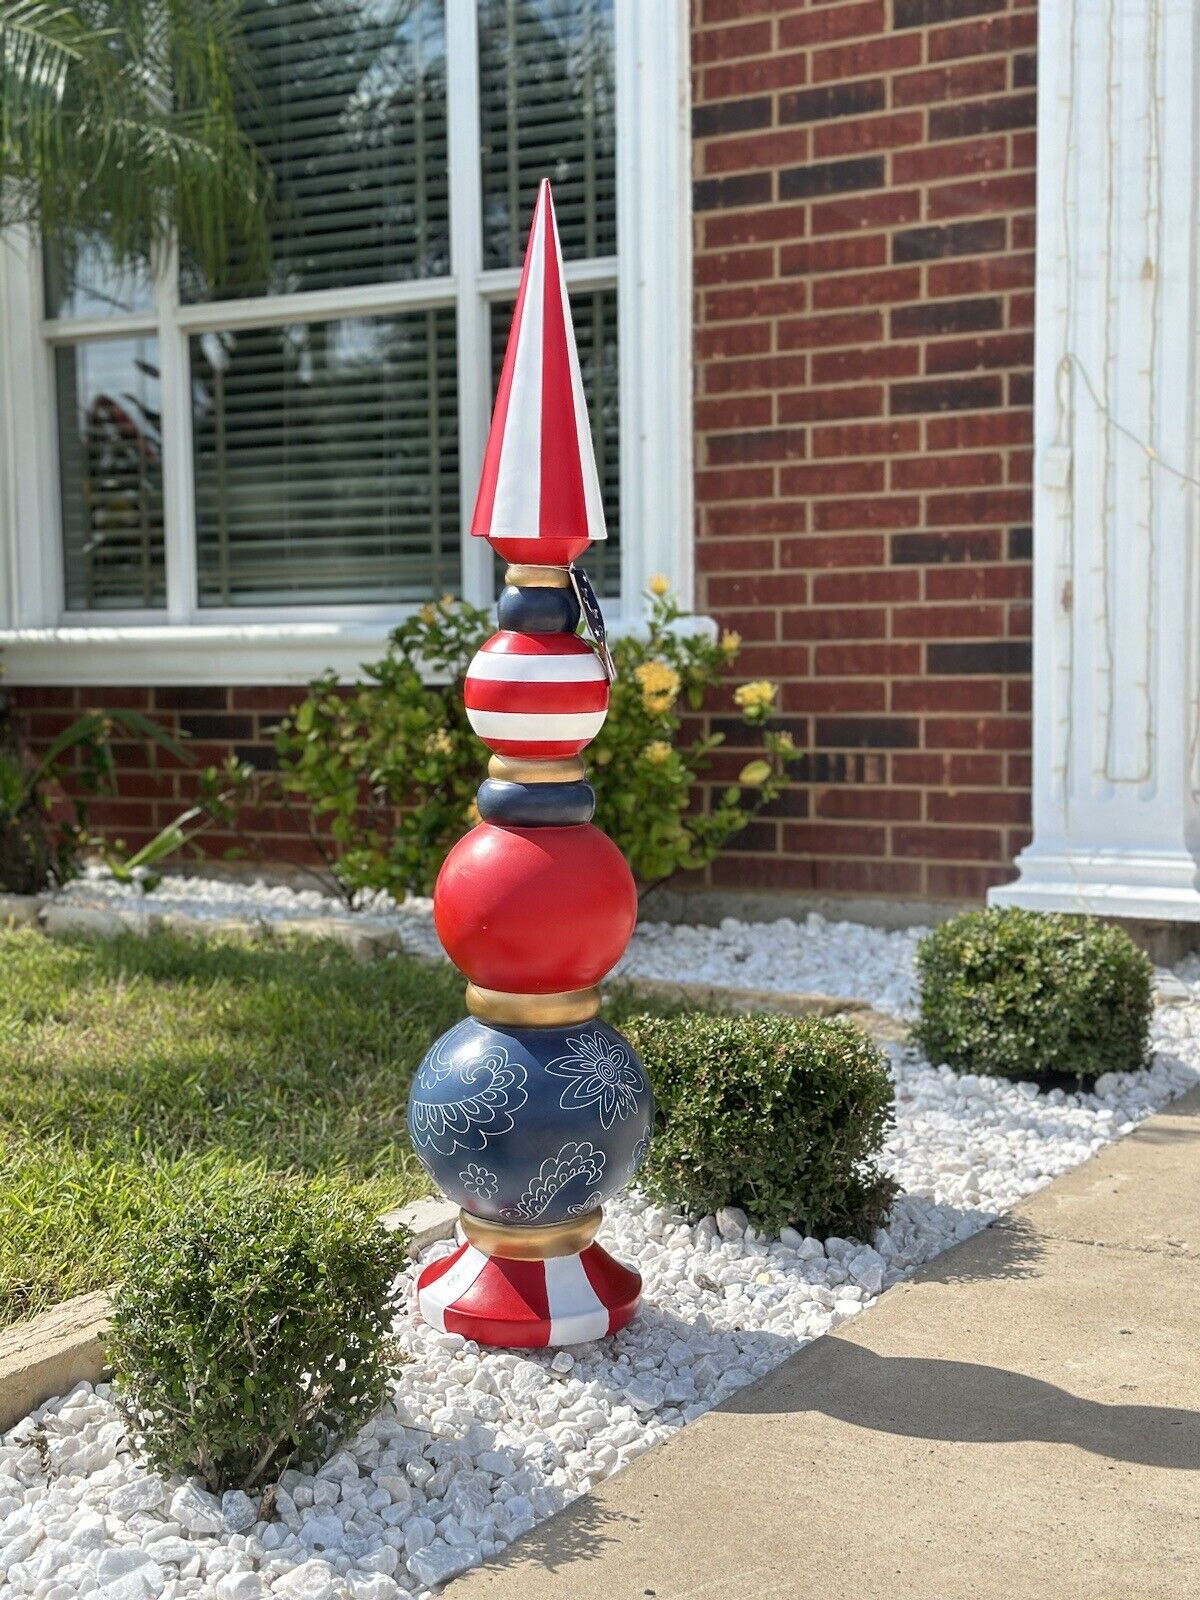 47” Topiary Holiday Decor Inside/Outside